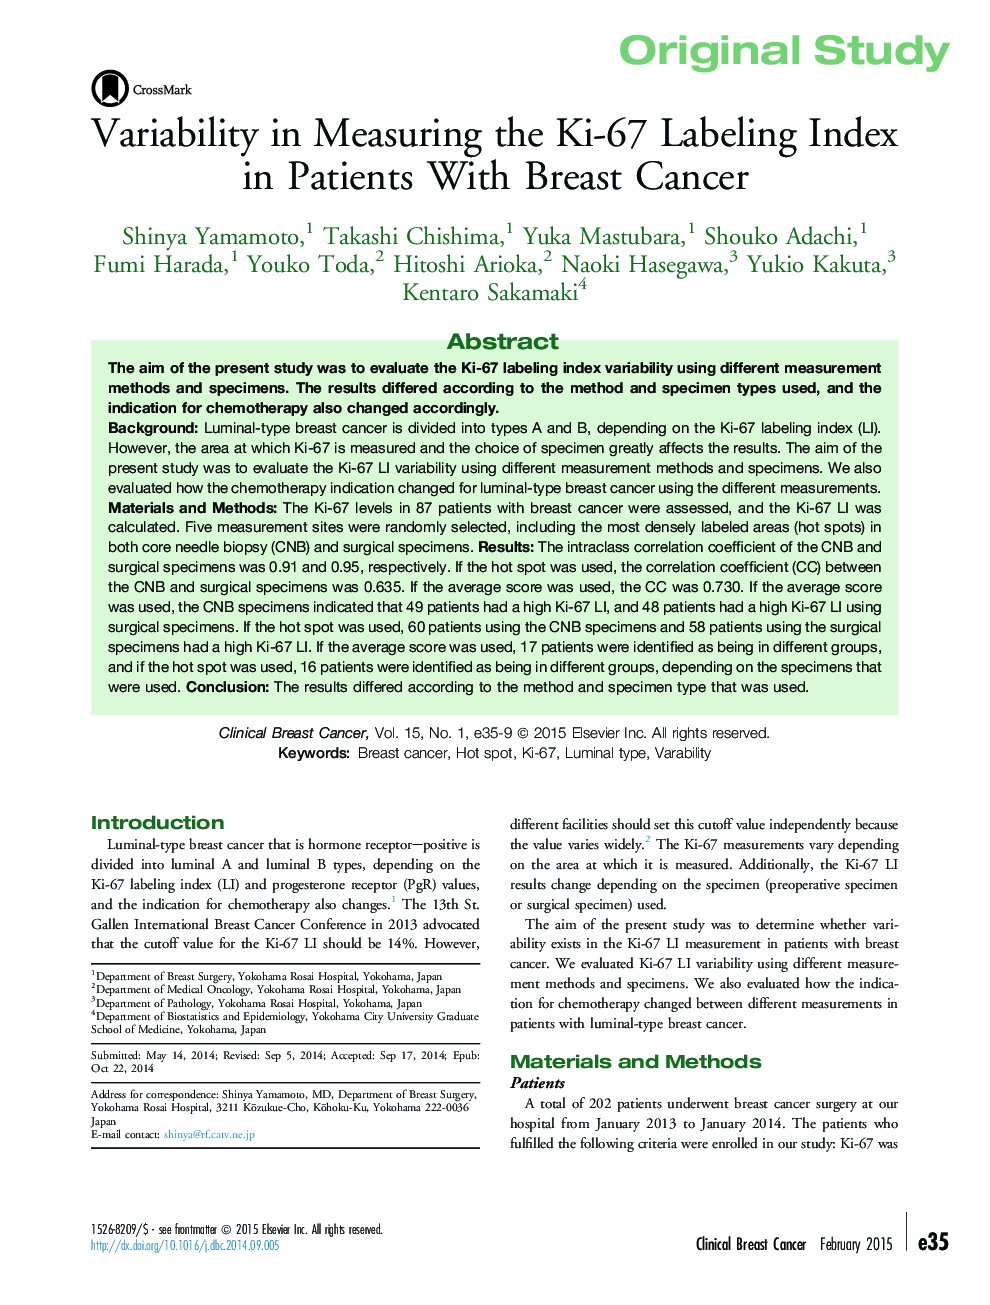 Variability in Measuring the Ki-67 Labeling Index in Patients With Breast Cancer